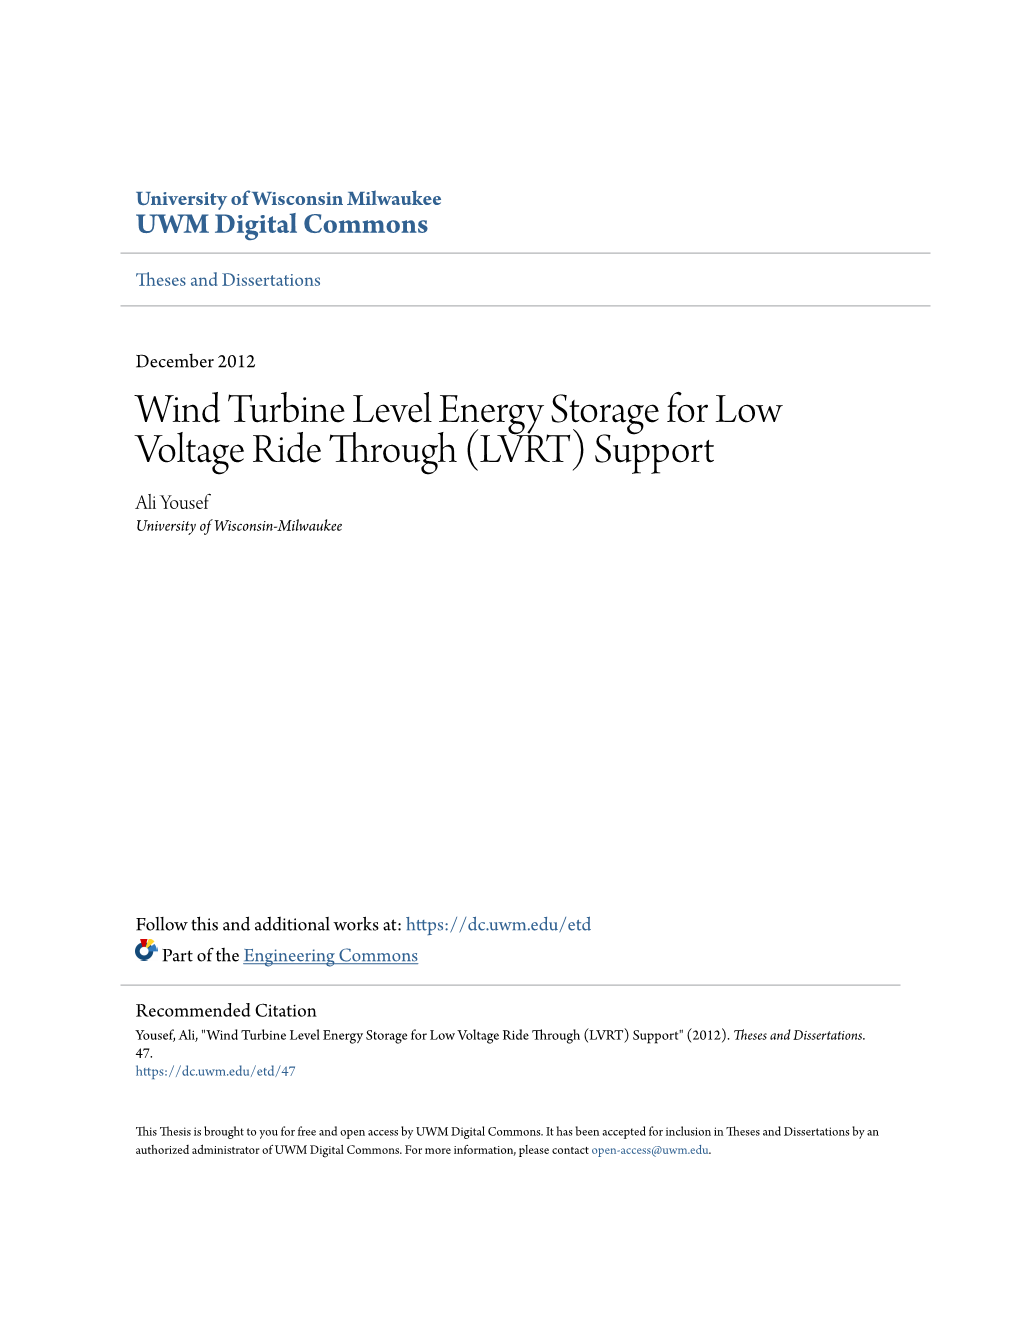 Wind Turbine Level Energy Storage for Low Voltage Ride Through (LVRT) Support Ali Yousef University of Wisconsin-Milwaukee